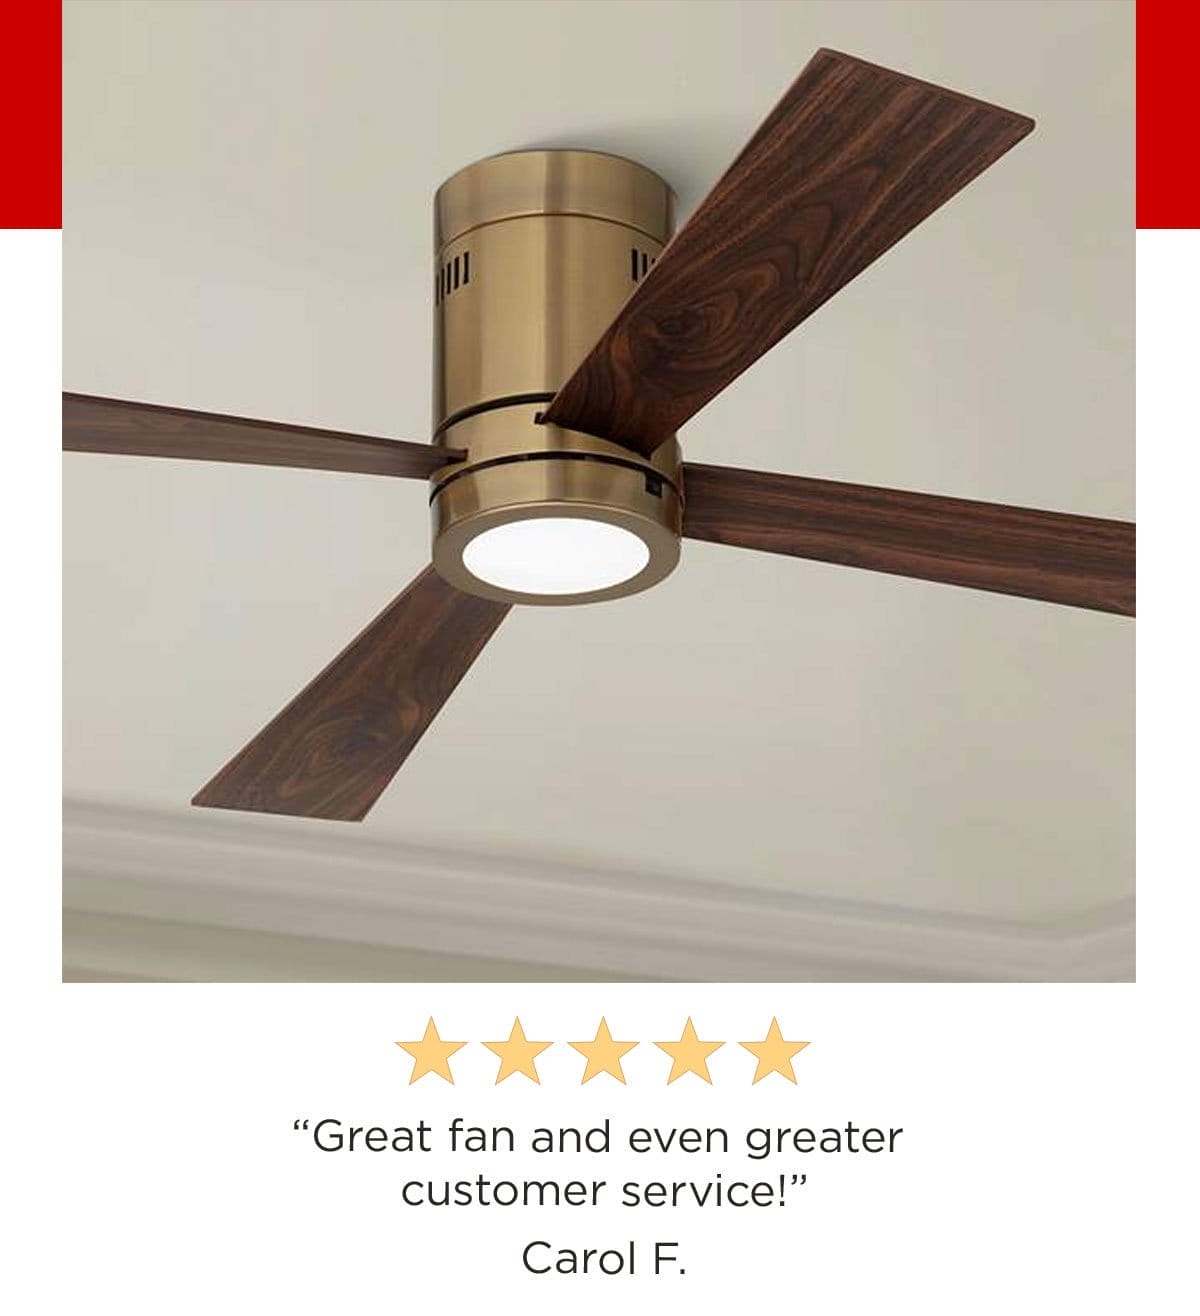 5 stars - "Great fan and even greater customer service!" Carol F.